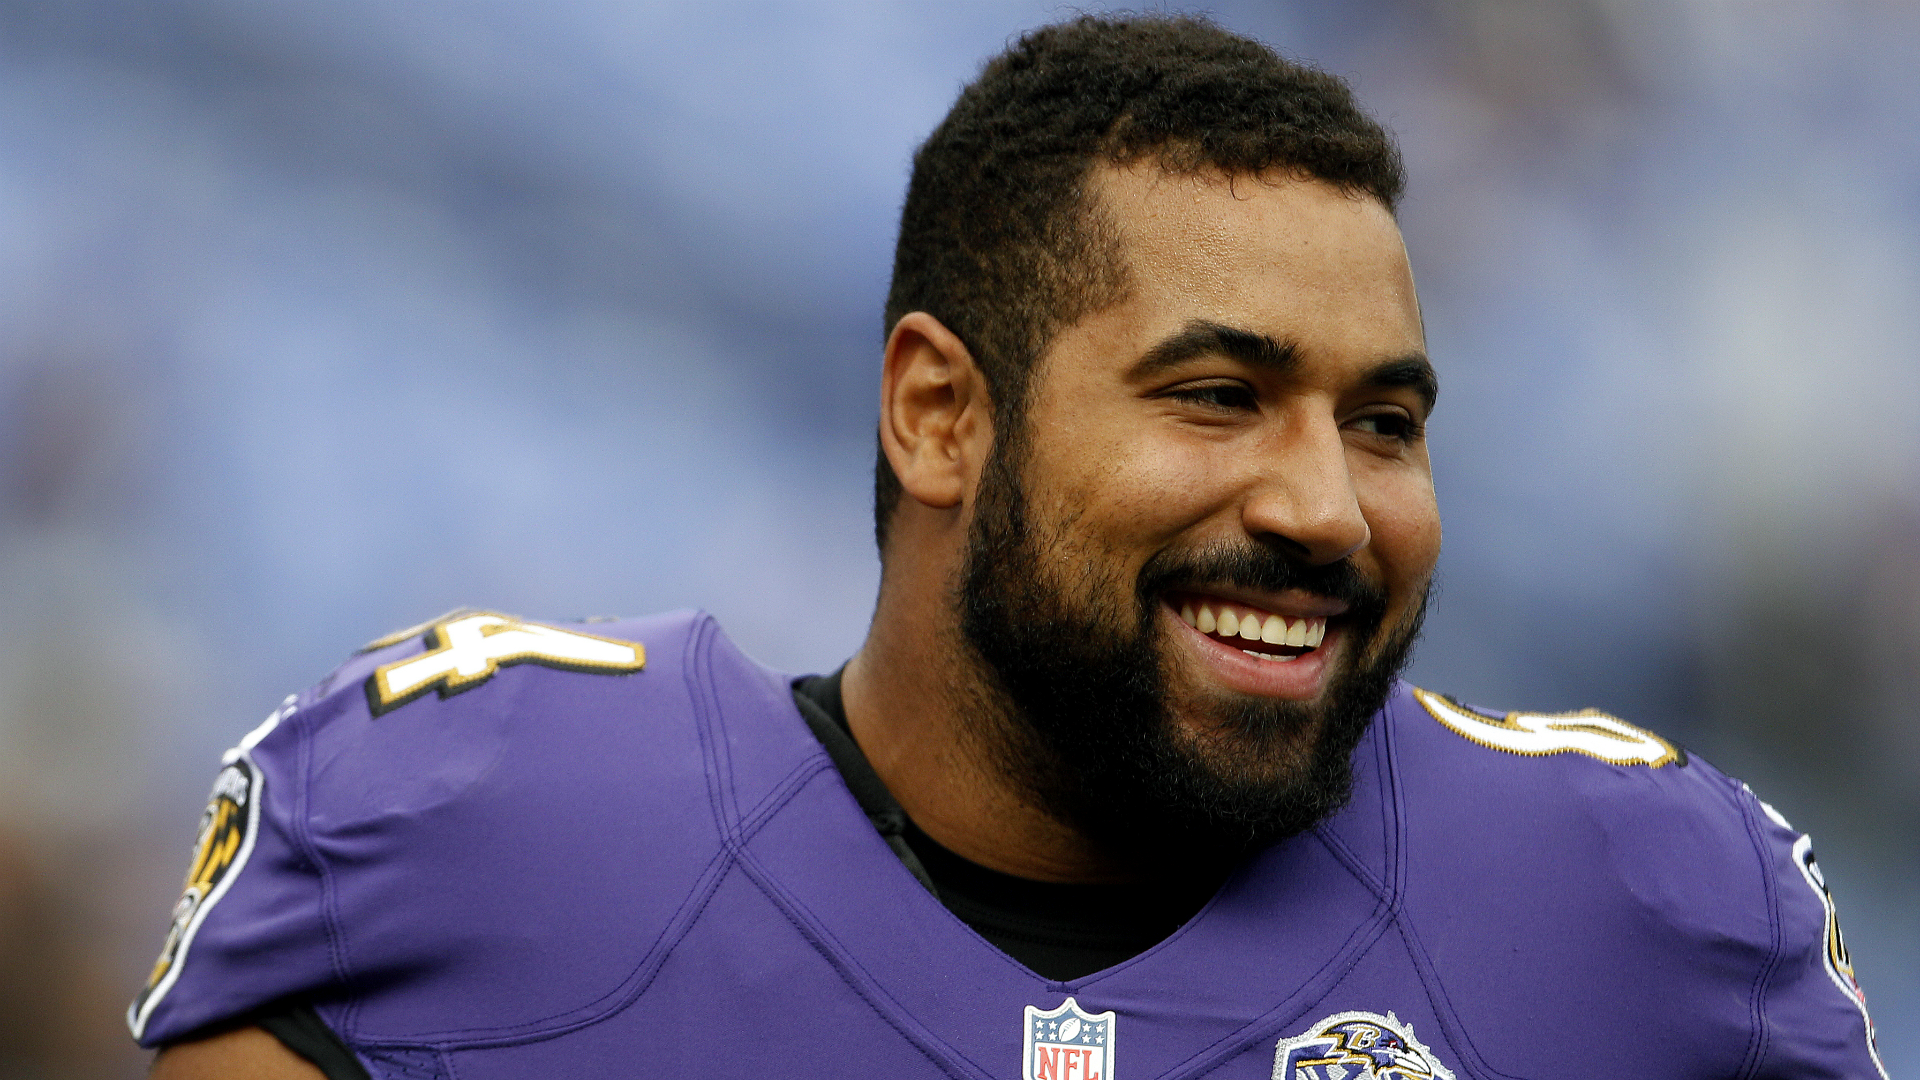 John Urschel didn't tell Ravens he was a full-time Ph.D. student at MIT while in the NFL